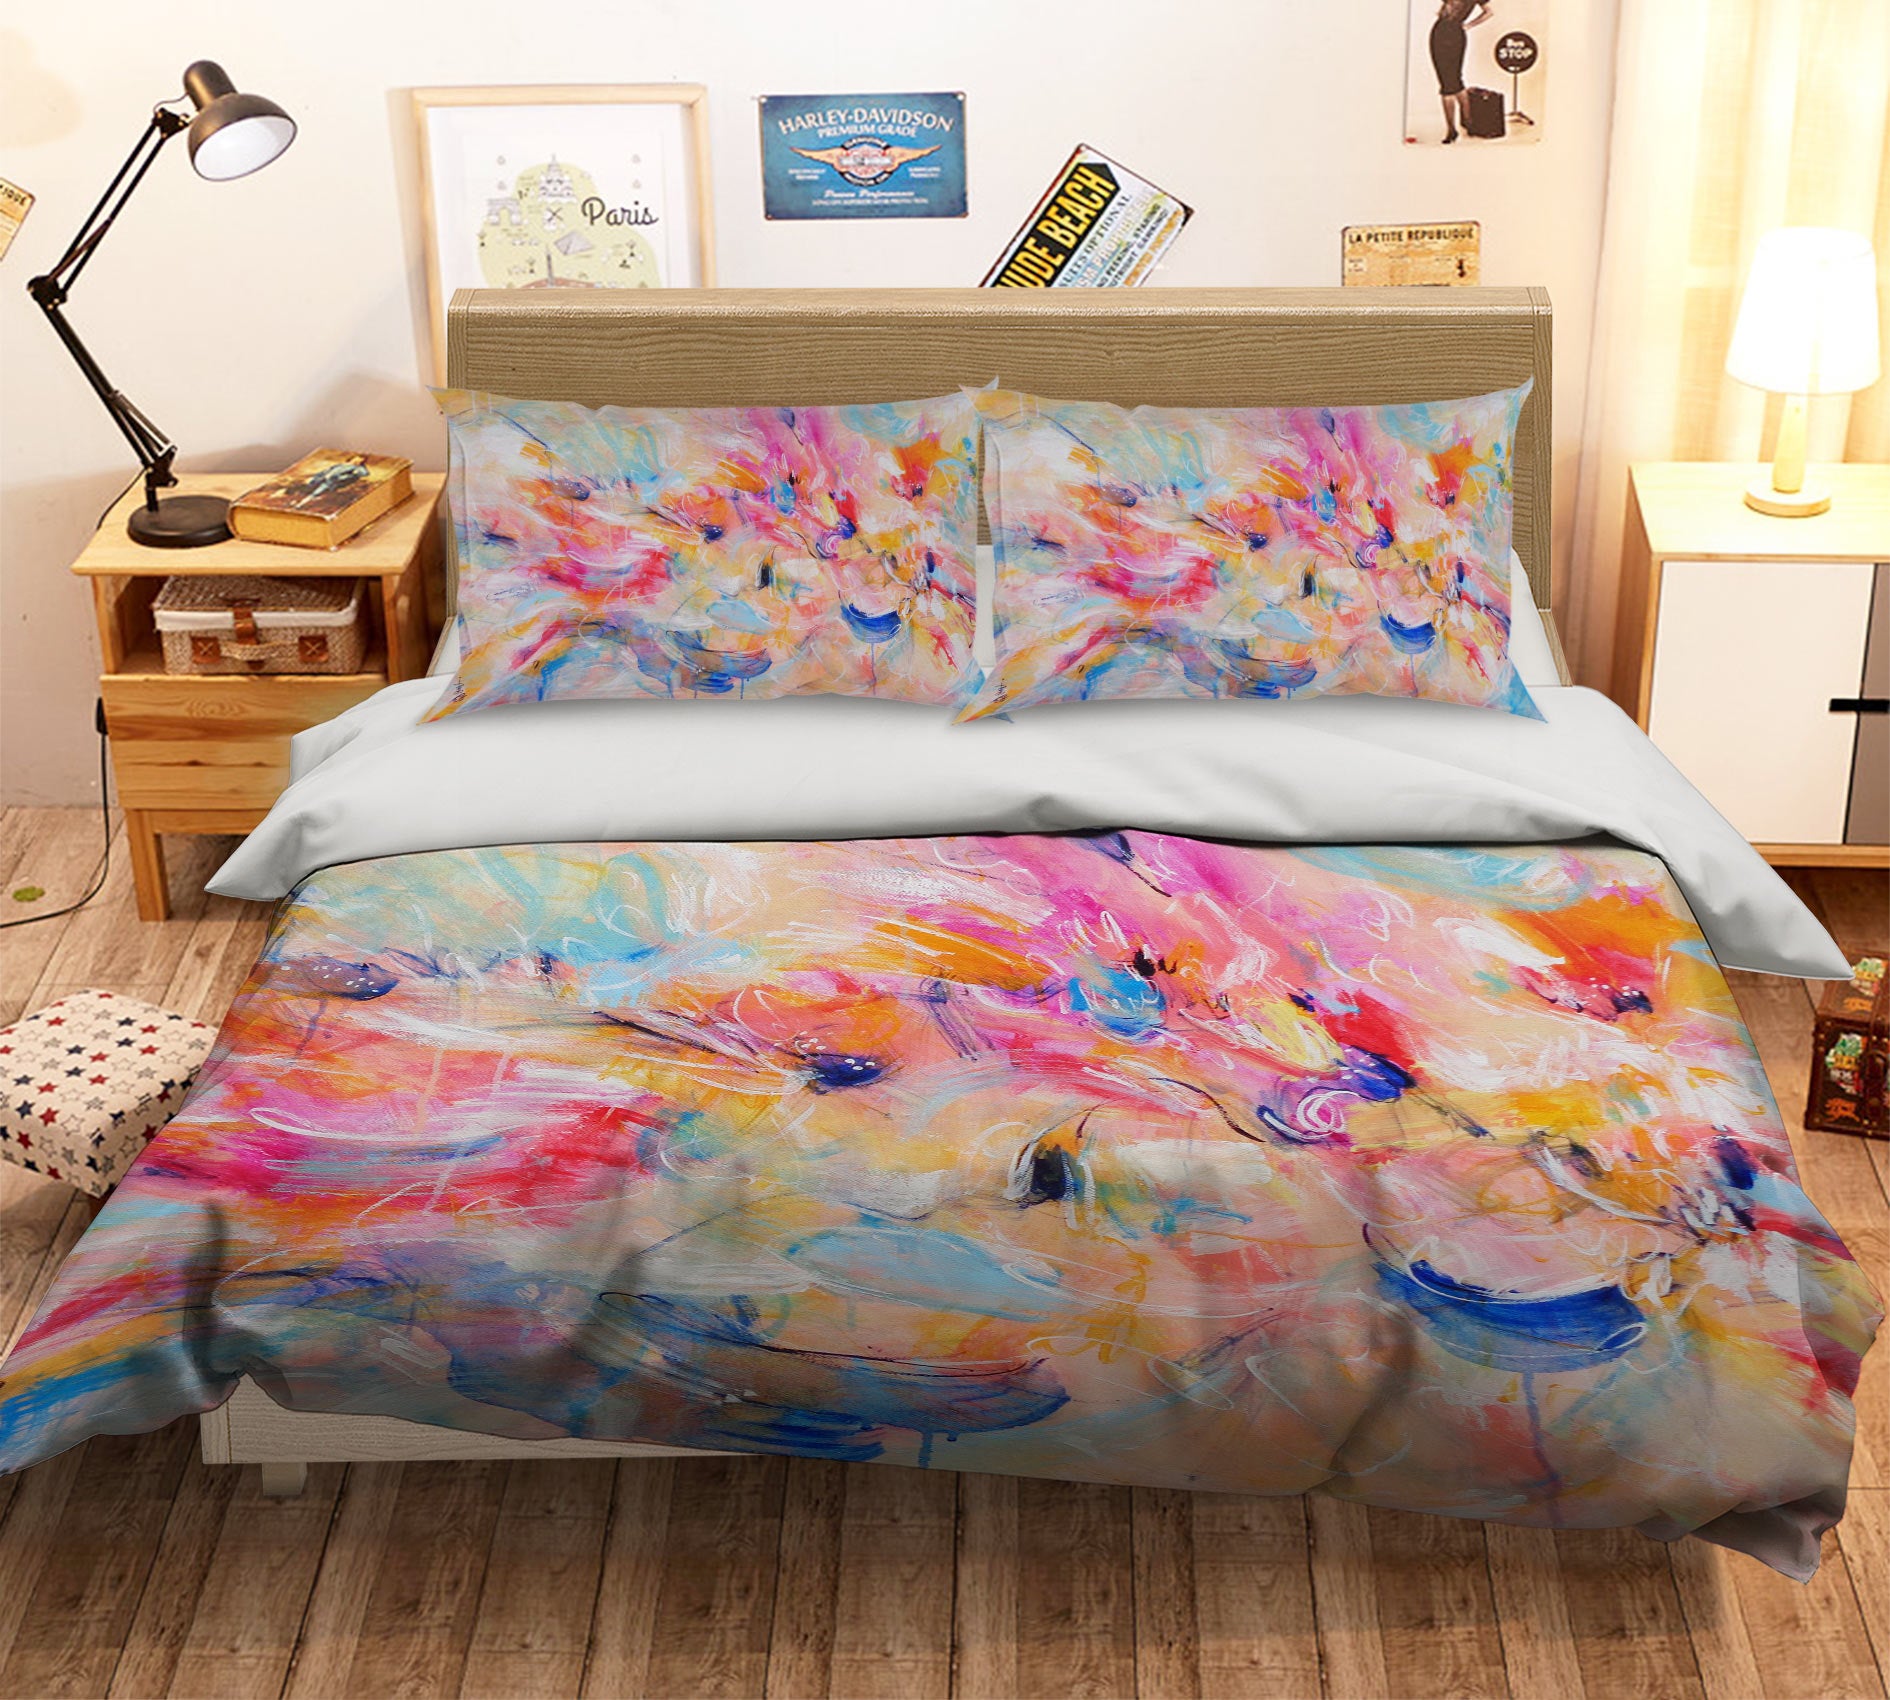 3D Color Painting 1214 Misako Chida Bedding Bed Pillowcases Quilt Cover Duvet Cover